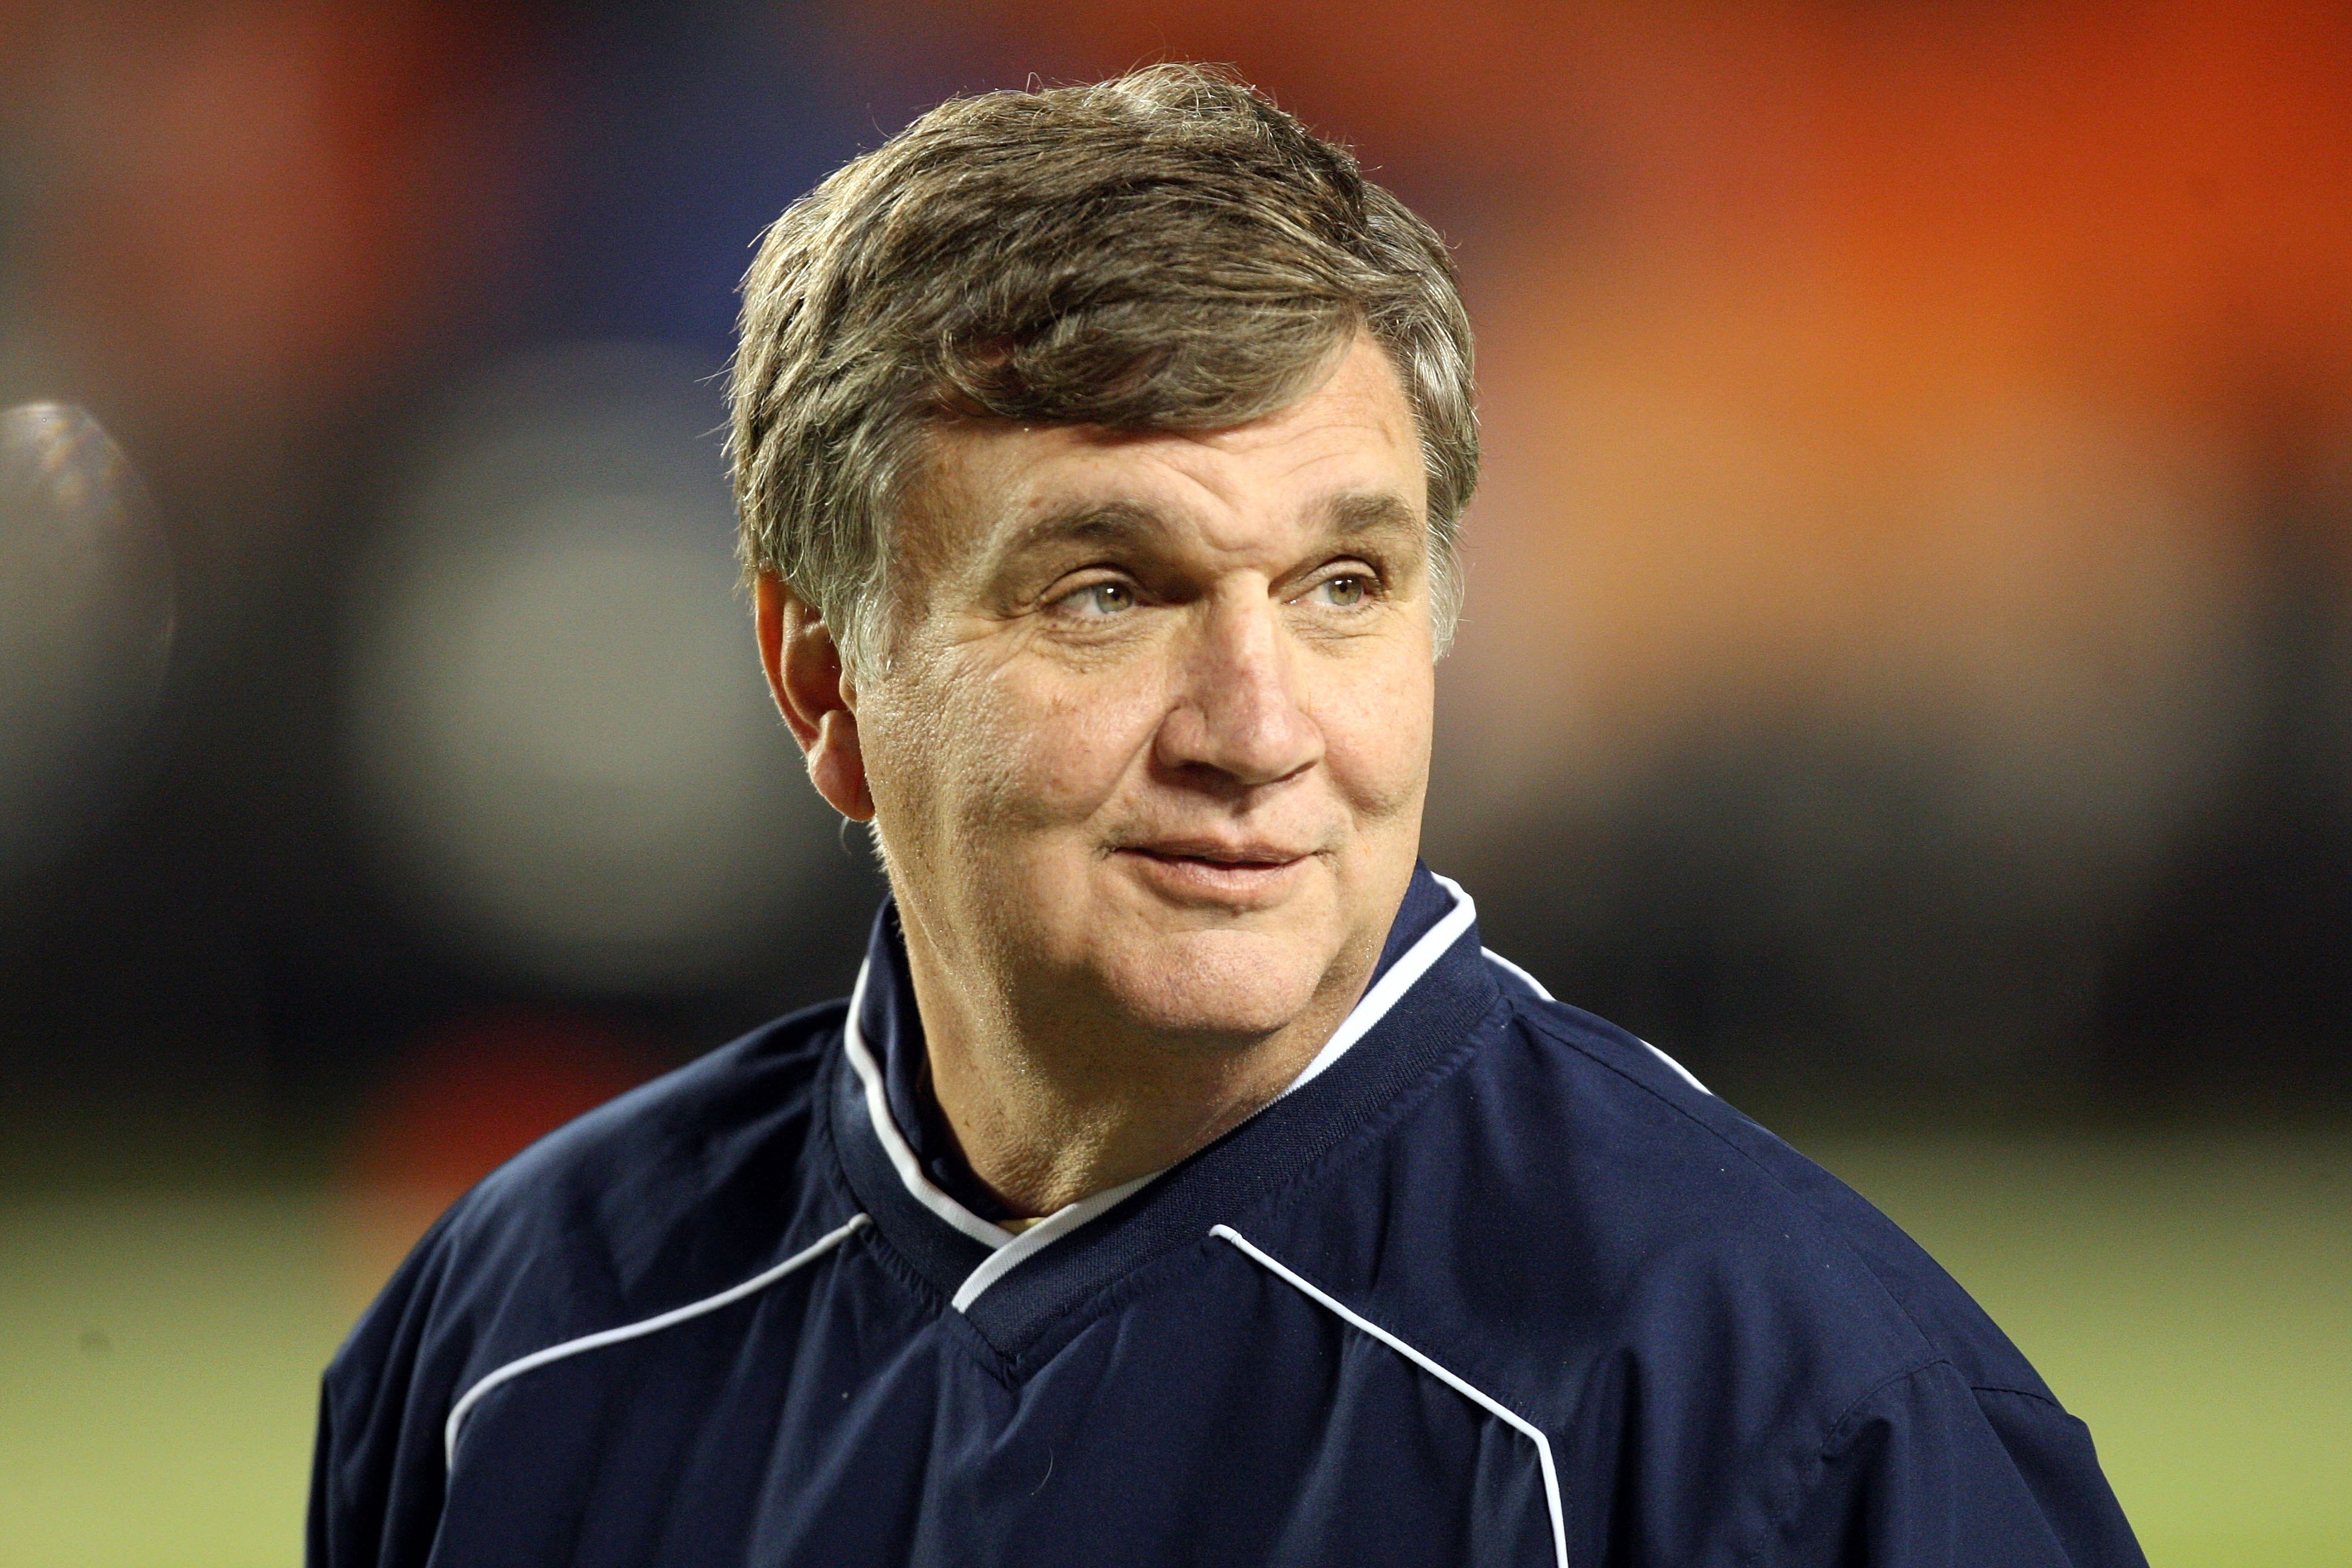 MIAMI GARDENS, FL - JANUARY 05:  Head coach Paul Johnson of the Georgia Tech Yellow Jackets smiles on the field during warm ups against the Iowa Hawkeyes during the FedEx Orange Bowl at Land Shark Stadium on January 5, 2010 in Miami Gardens, Florida. Iowa